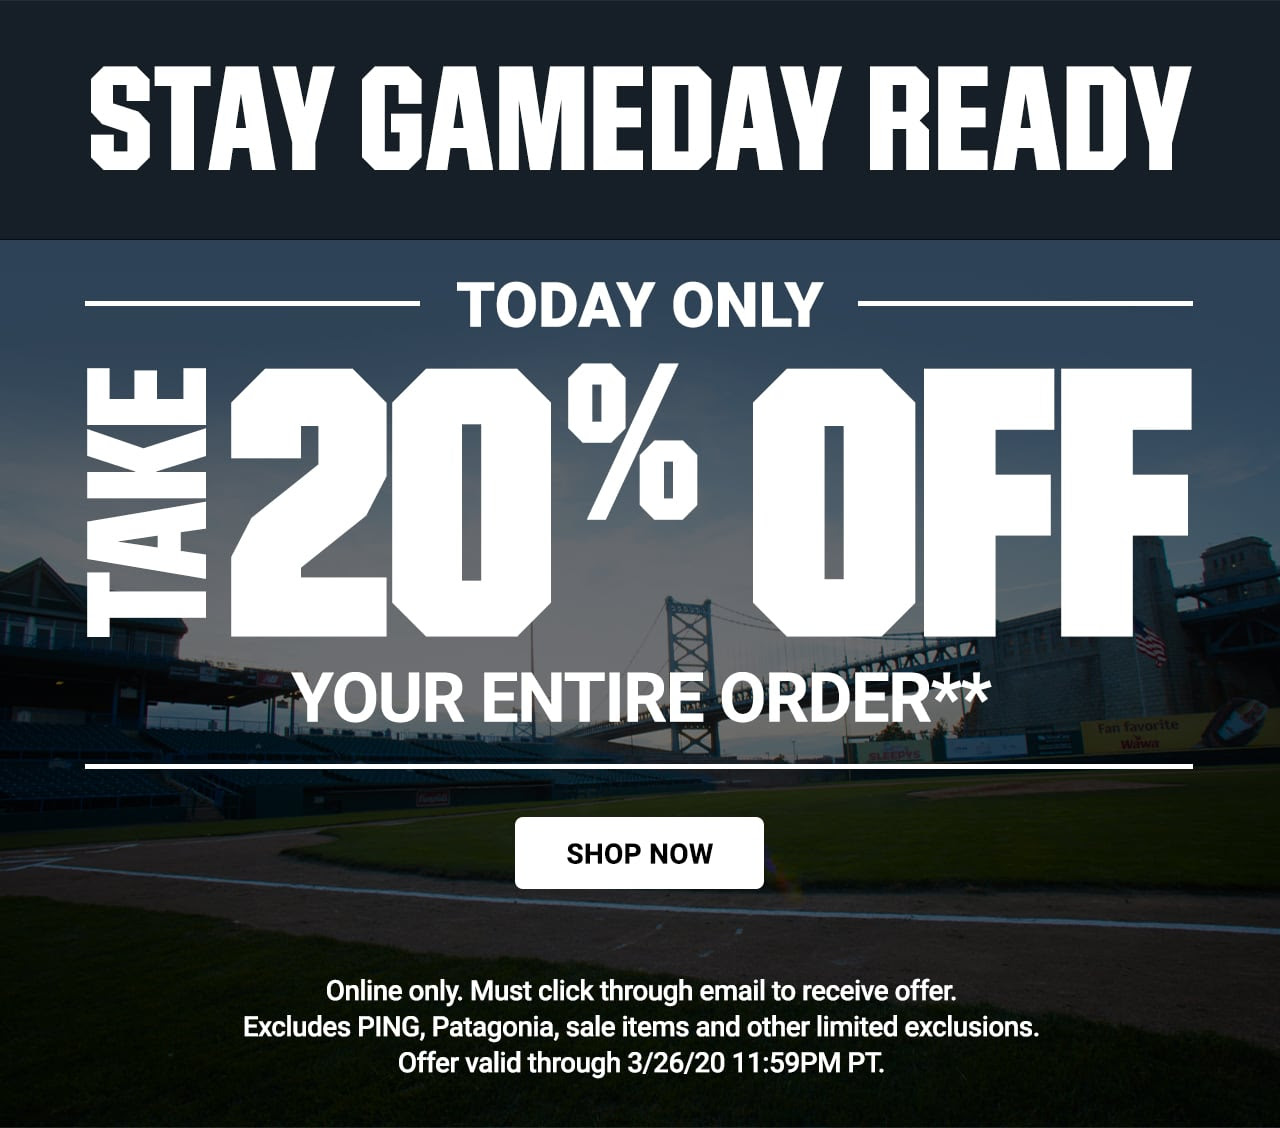 Stay gameday ready. Today only, take 20% off your entire order**. Online only. Must click through email to receive offer. Excludes PING, Patagonia, sale items and other limited exclusions. Offer valid through March 26, 2020 11:59PM PT.           Excludes sale items, Patagonia and Ping. Offer valid through March 26, 2020 11:59PM PT, Shop now.